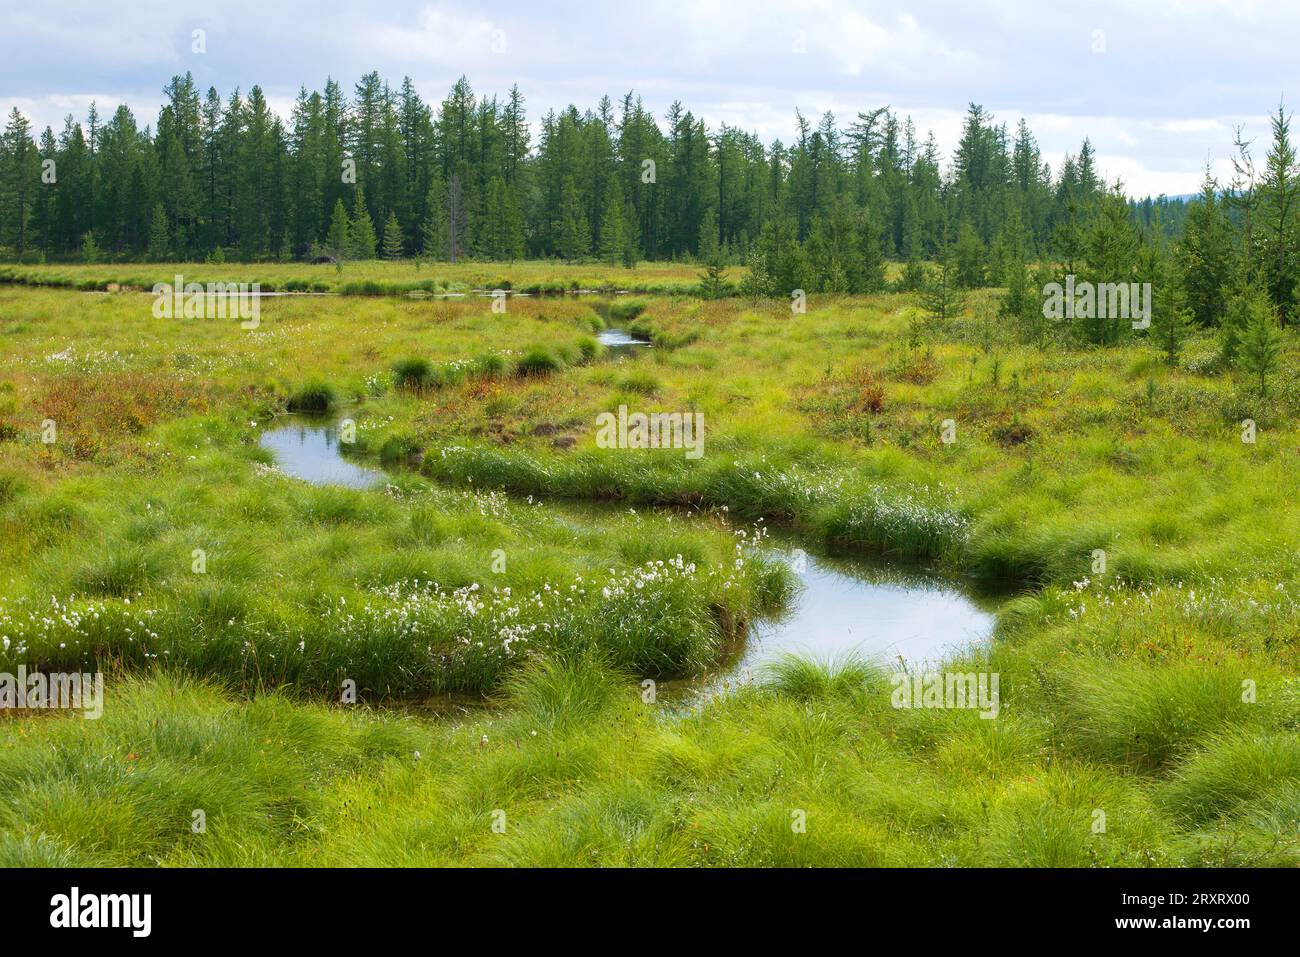 Sunny august day in the forest tundra. Yamal, Russia Stock Photo